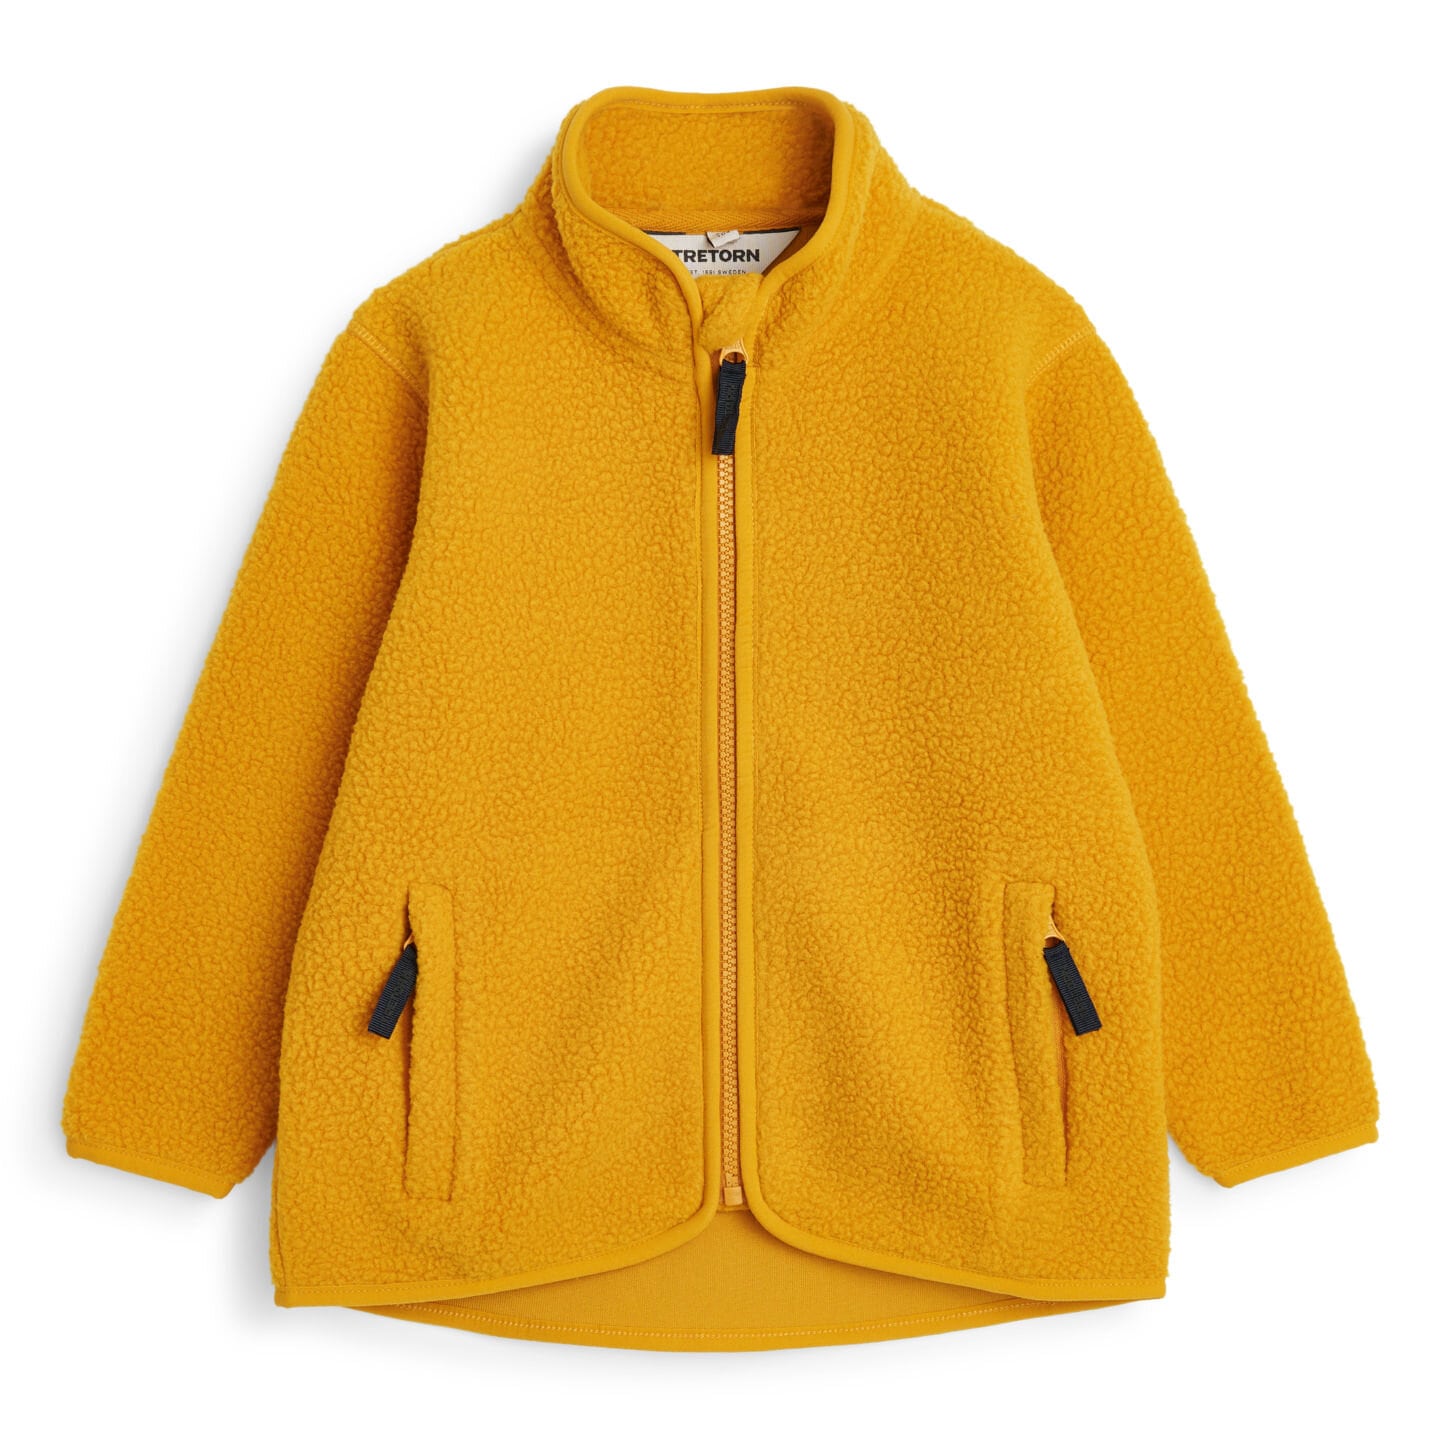 Tretorn outerwear Functional kids | for